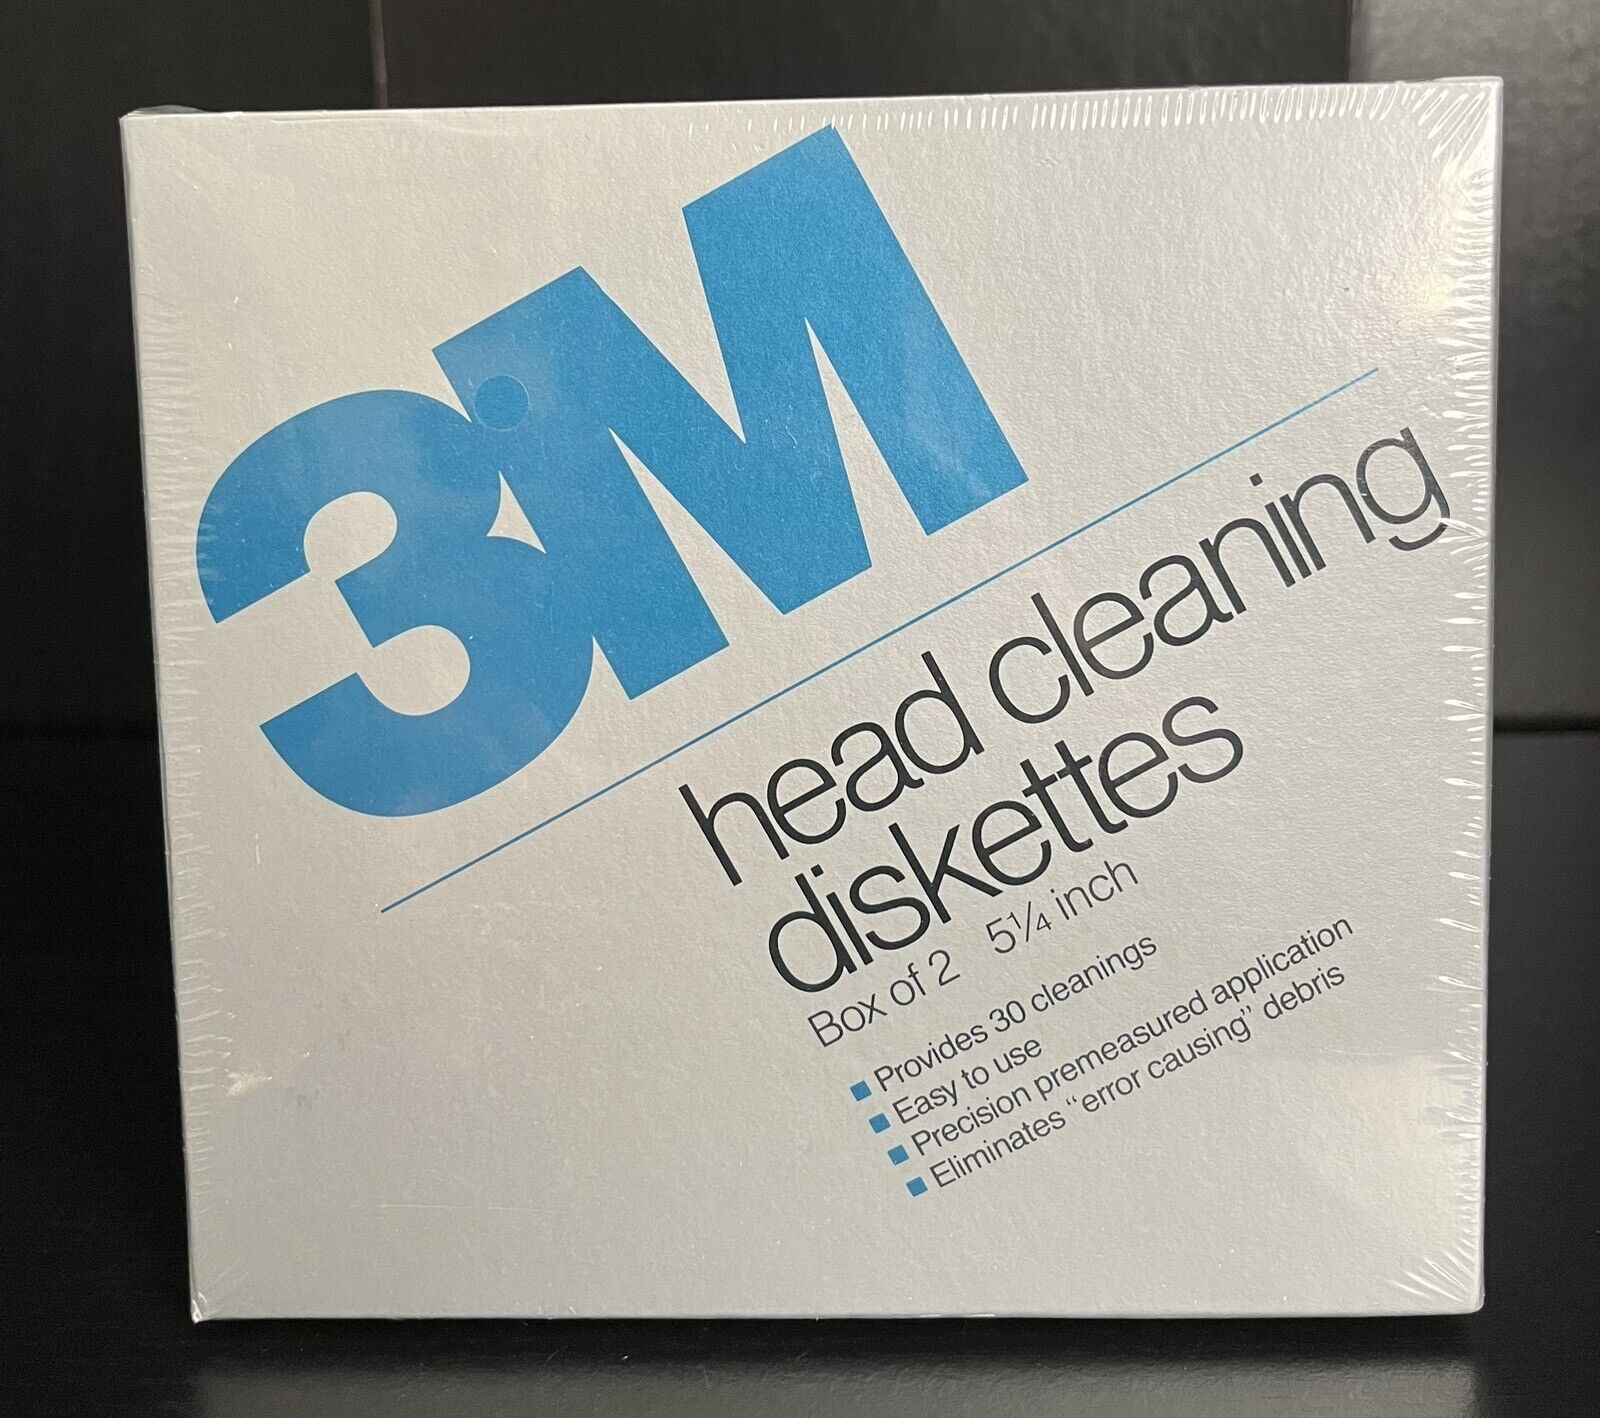 3M Head Cleaning Diskettes 5.25 Inch - Box Of 2 - Vintage *NEW/SEALED*